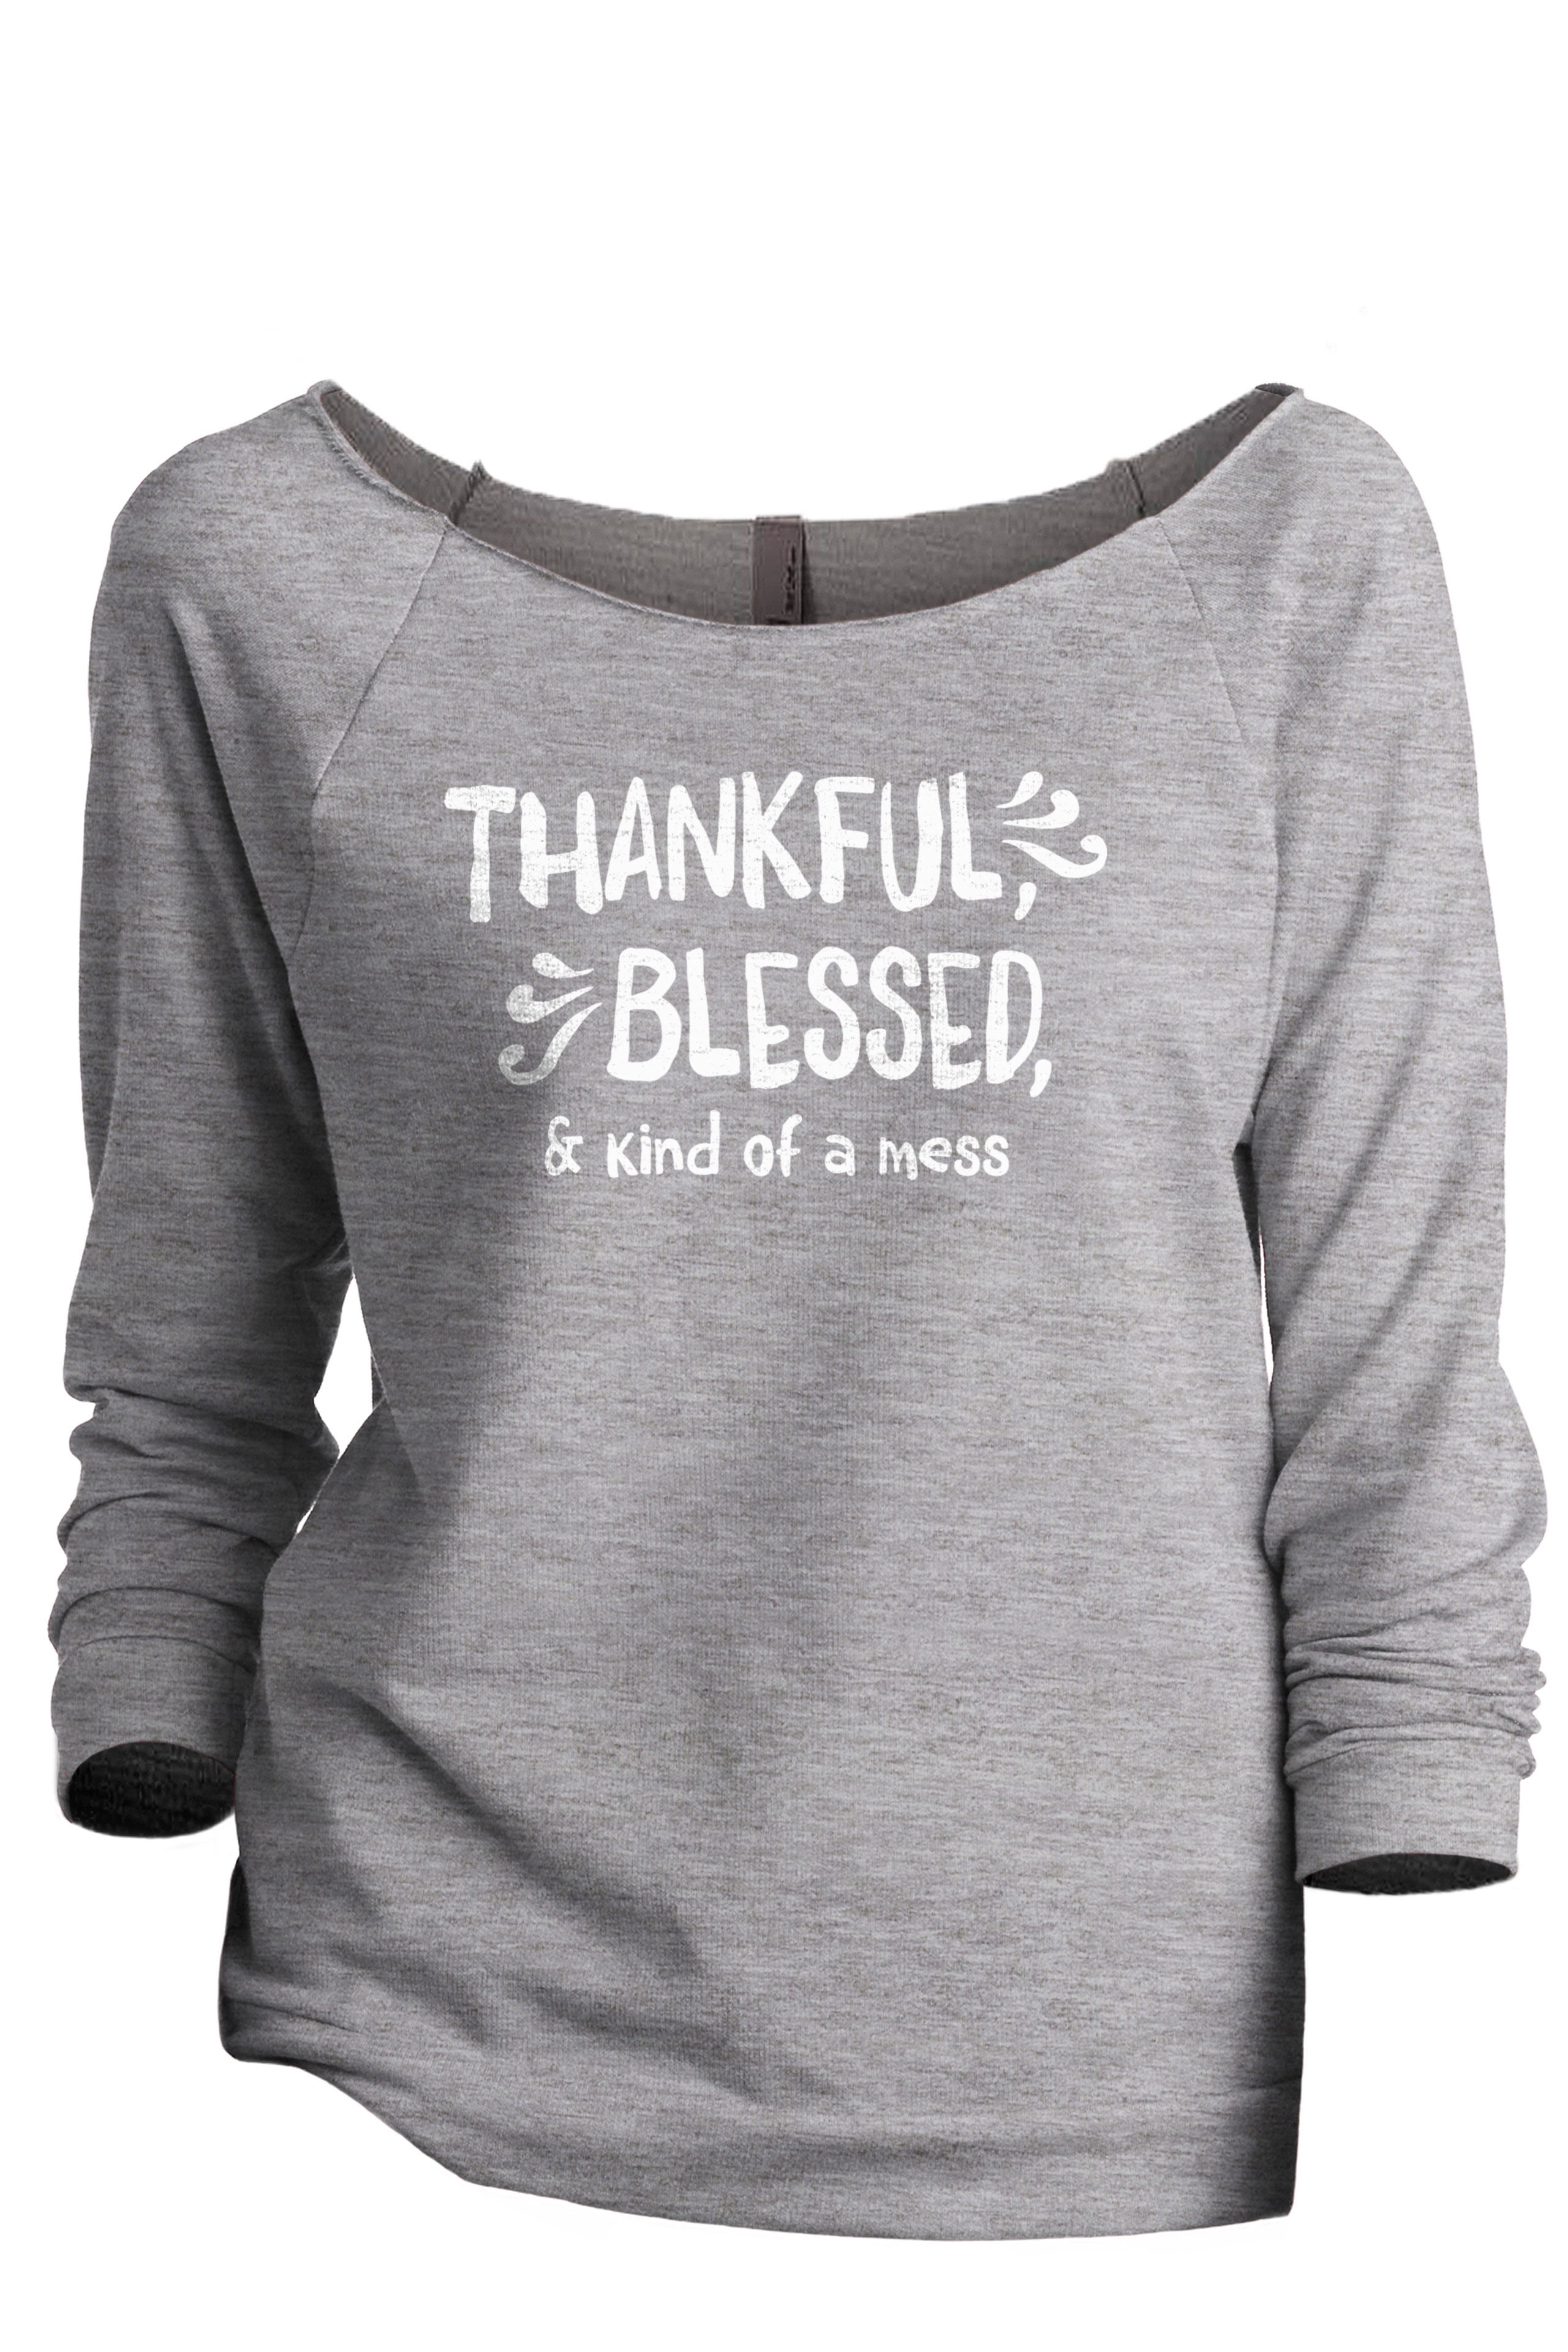 Women Soft Comfy Tee Bless AMEN Grateful Love Religious FREE SHIP Thankful Blessed and Kind of a Mess Graphic Tee Family